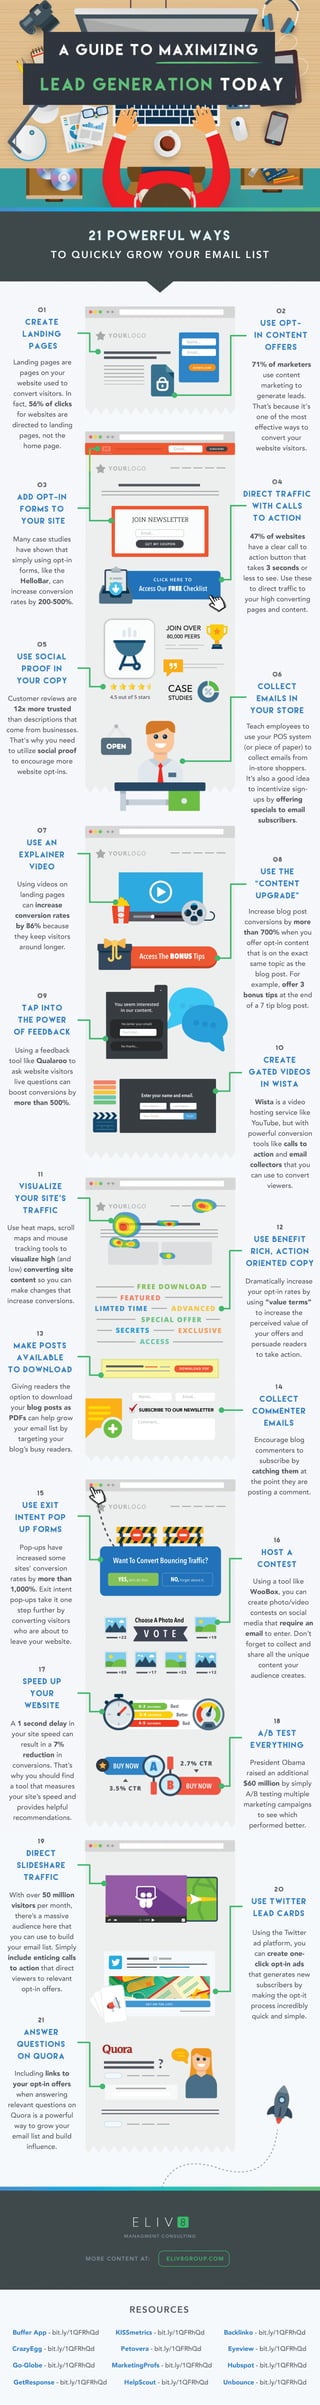 A Guide To Maximizing Lead Generation Today (Infographic)